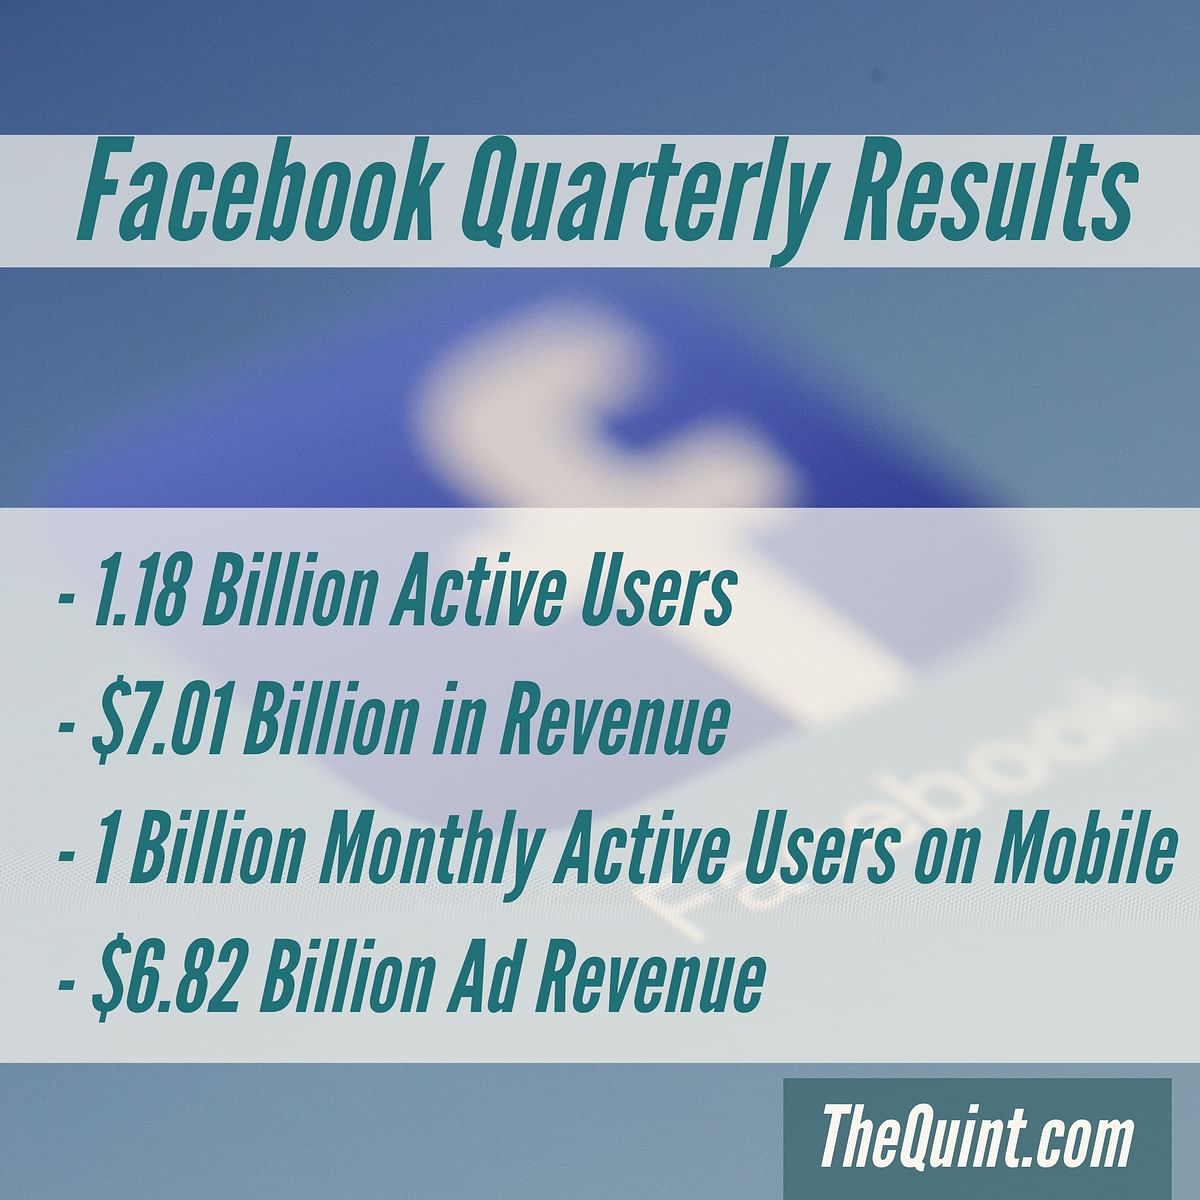 Facebook, on Wednesday, reported a greater-than-expected 56 percent rise in quarterly revenue.